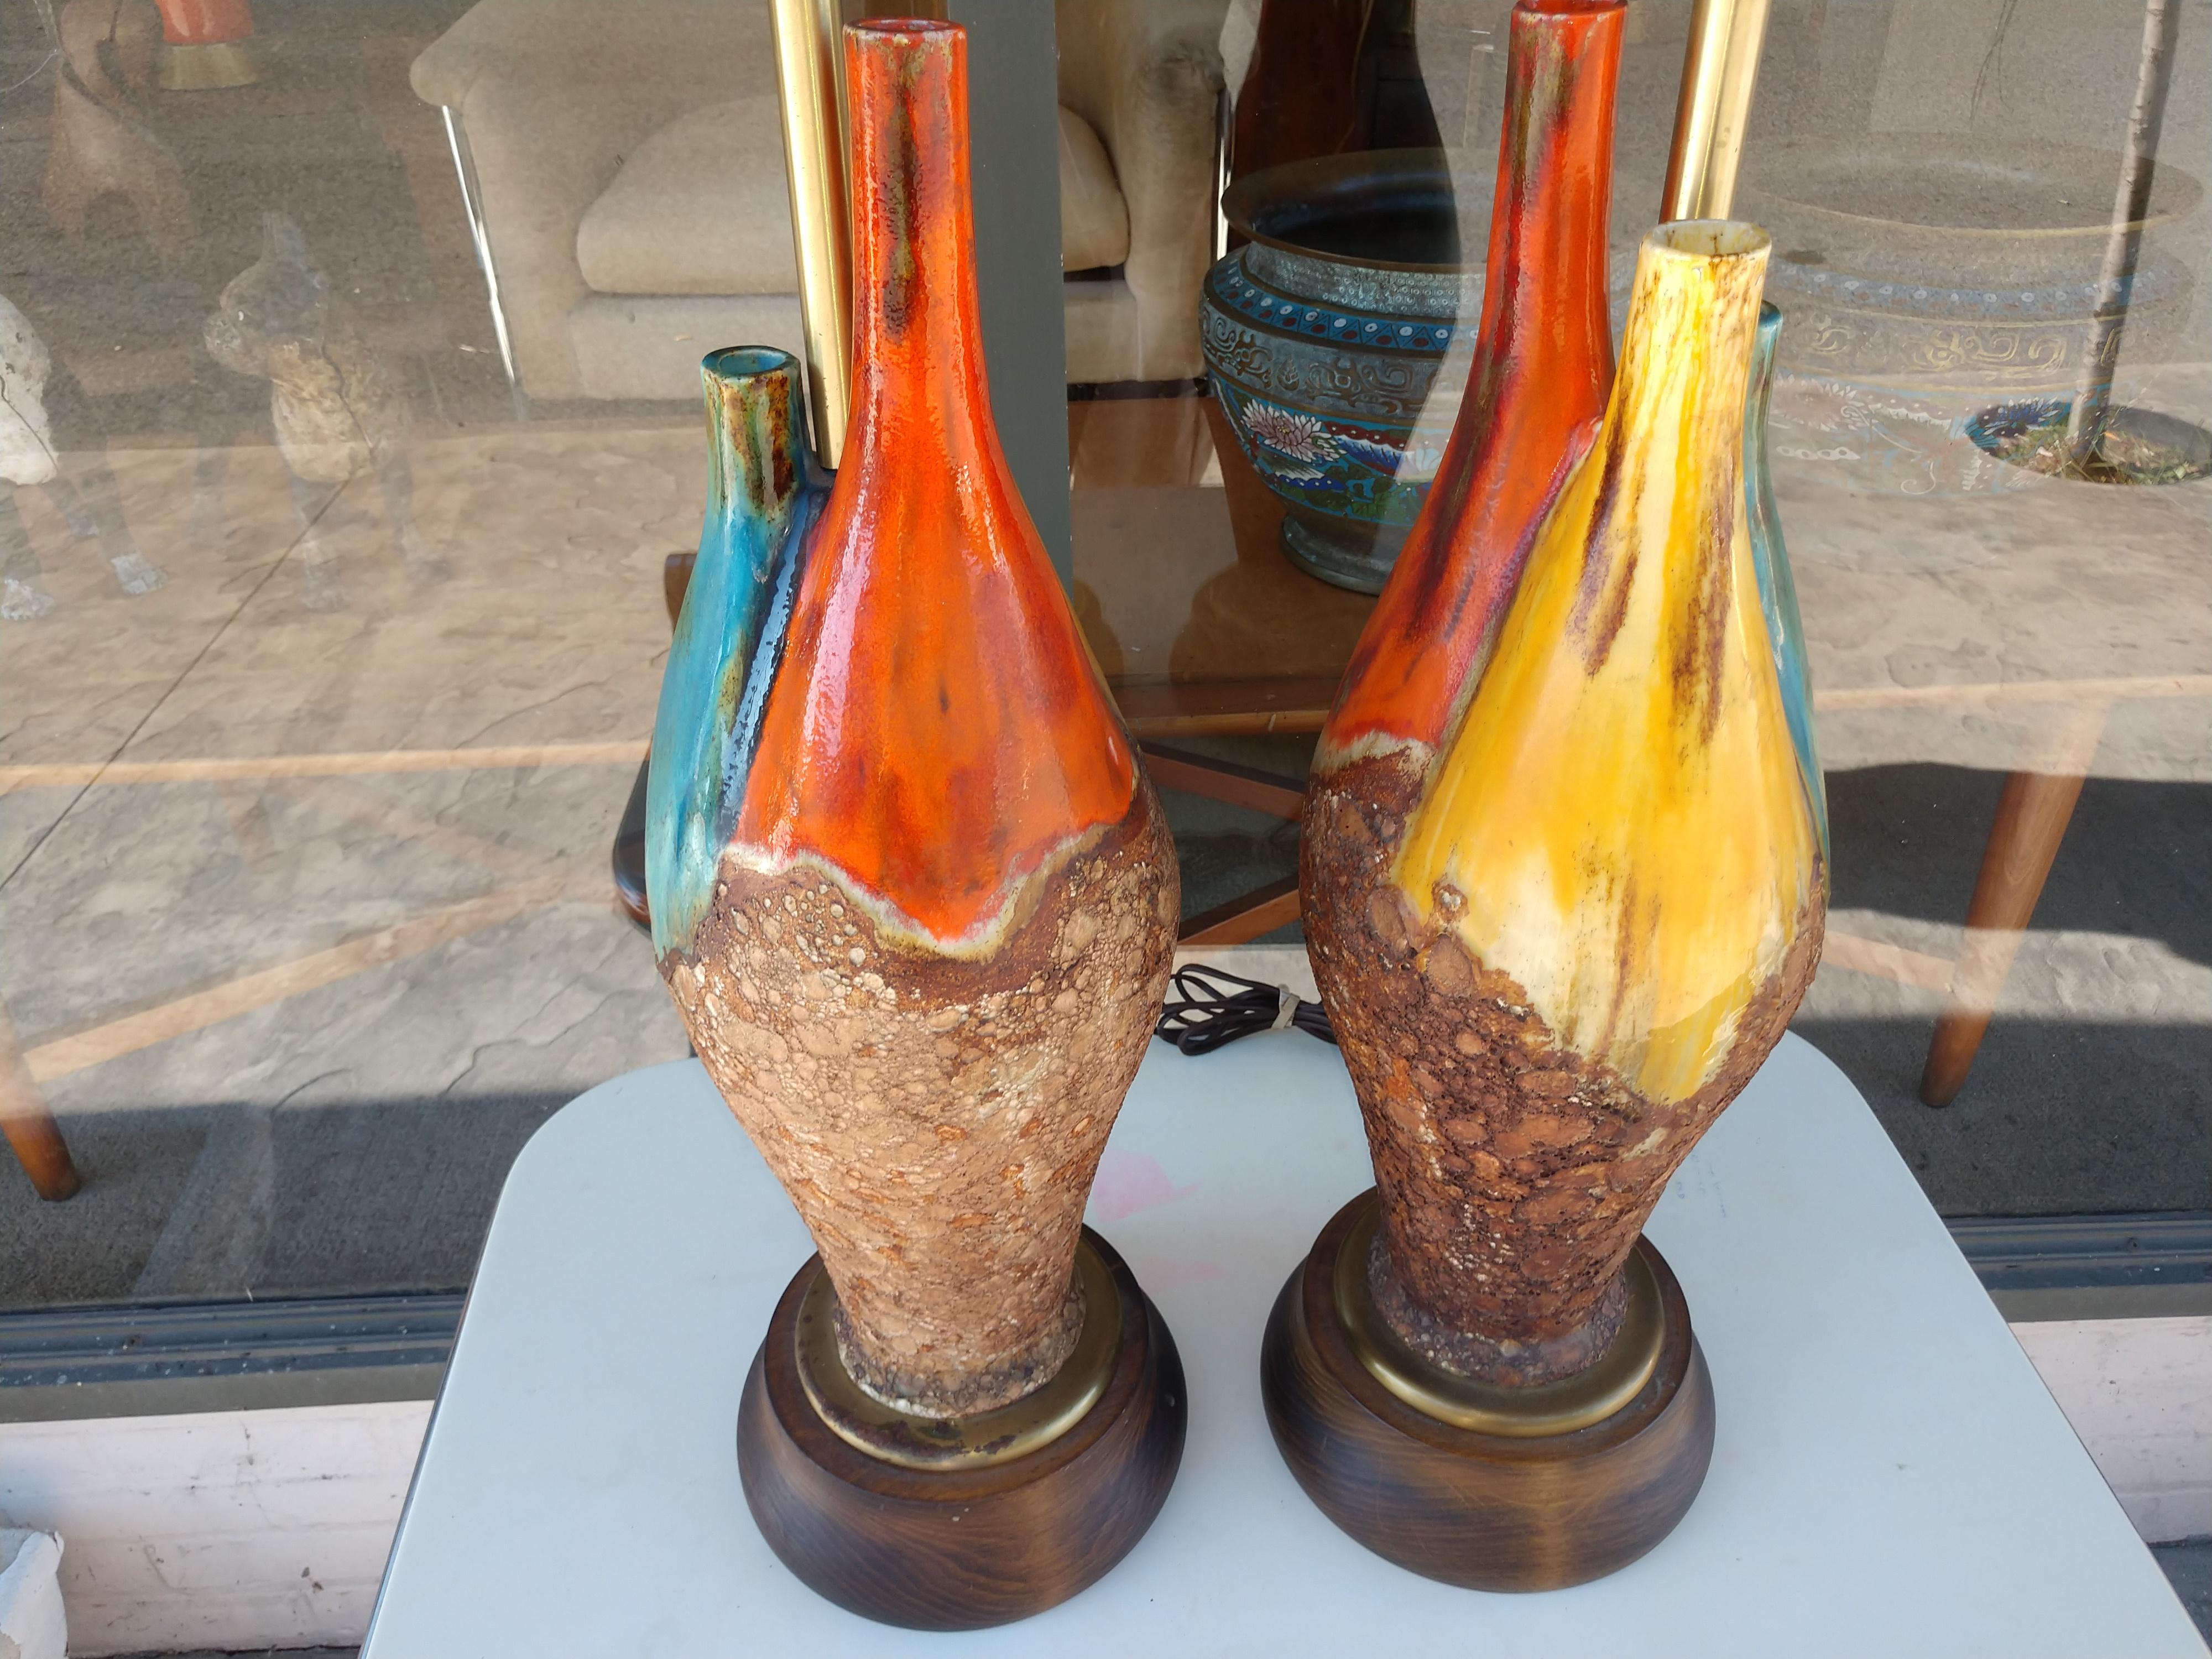 Fabulous pair of mid century lamps glazed in fantastic color with a Molton lava like lower half. Brass fittings with a walnut base. Lamps are tall 27.5 to the top of the socket with a 7.25 inch base. 37 to the top of the shades. Shades not included.